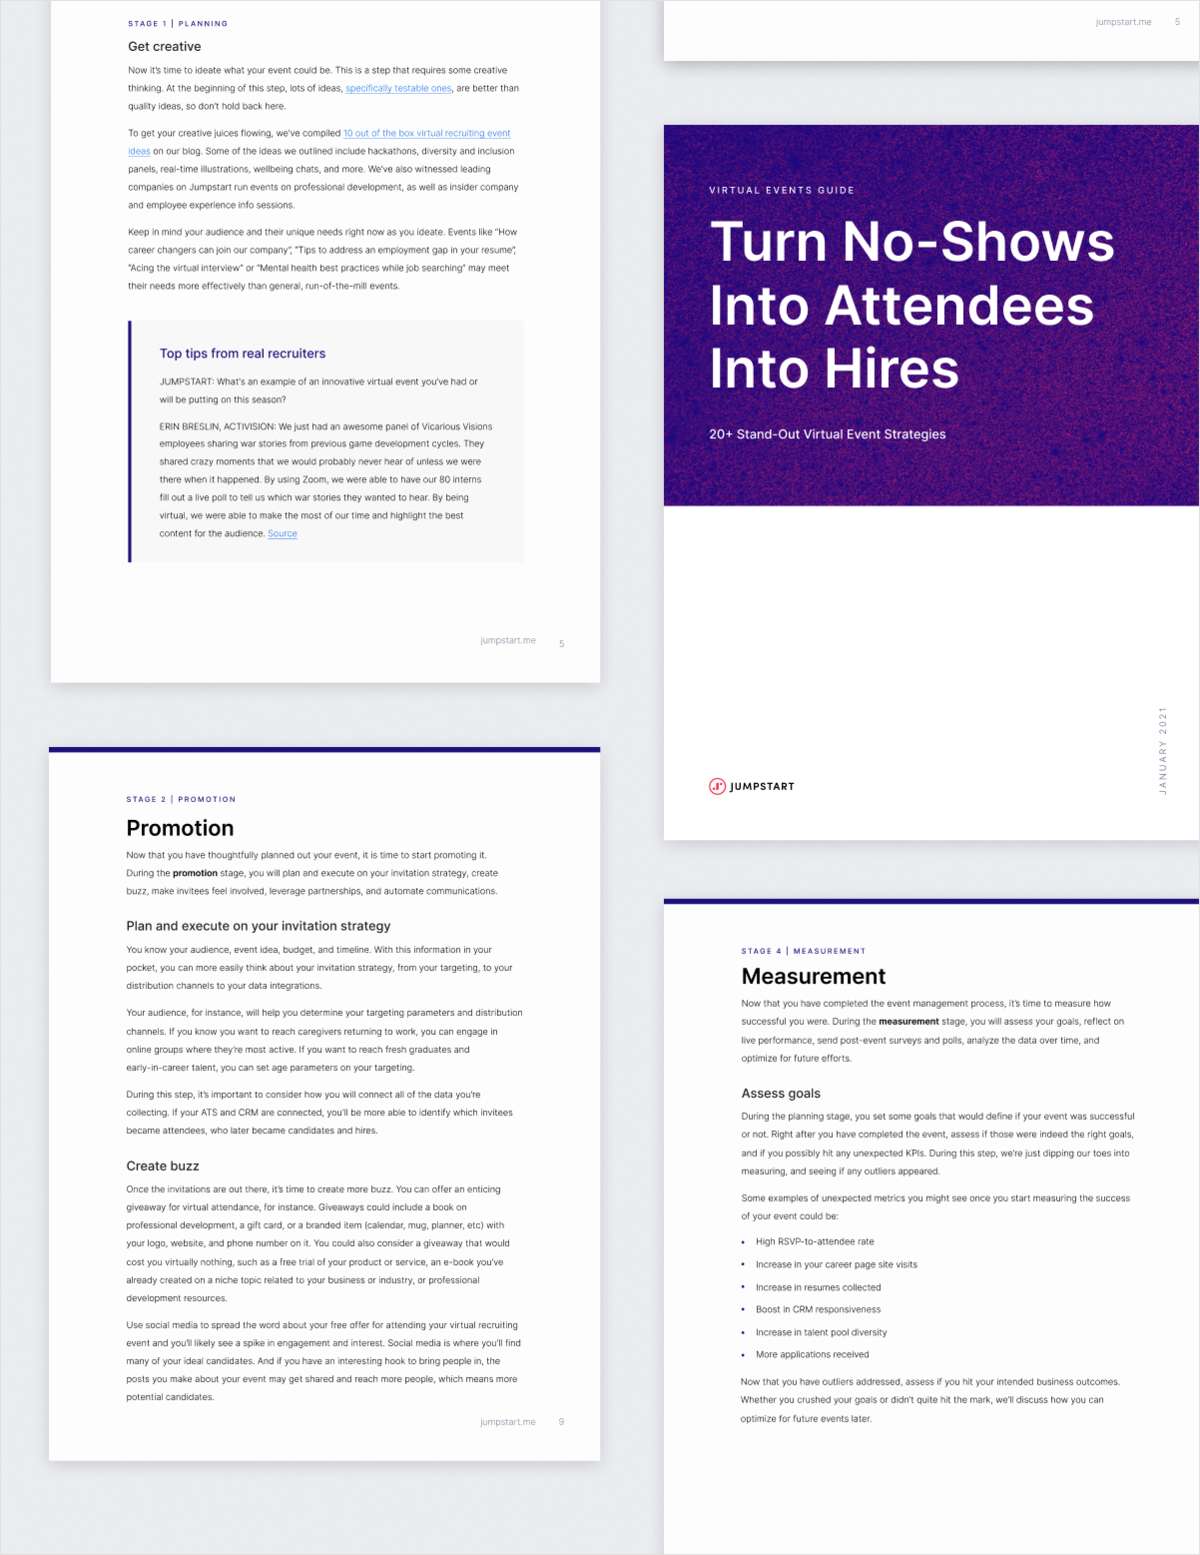 Free Virtual Events Guide: Turn No-Shows Into Attendees Into Hires